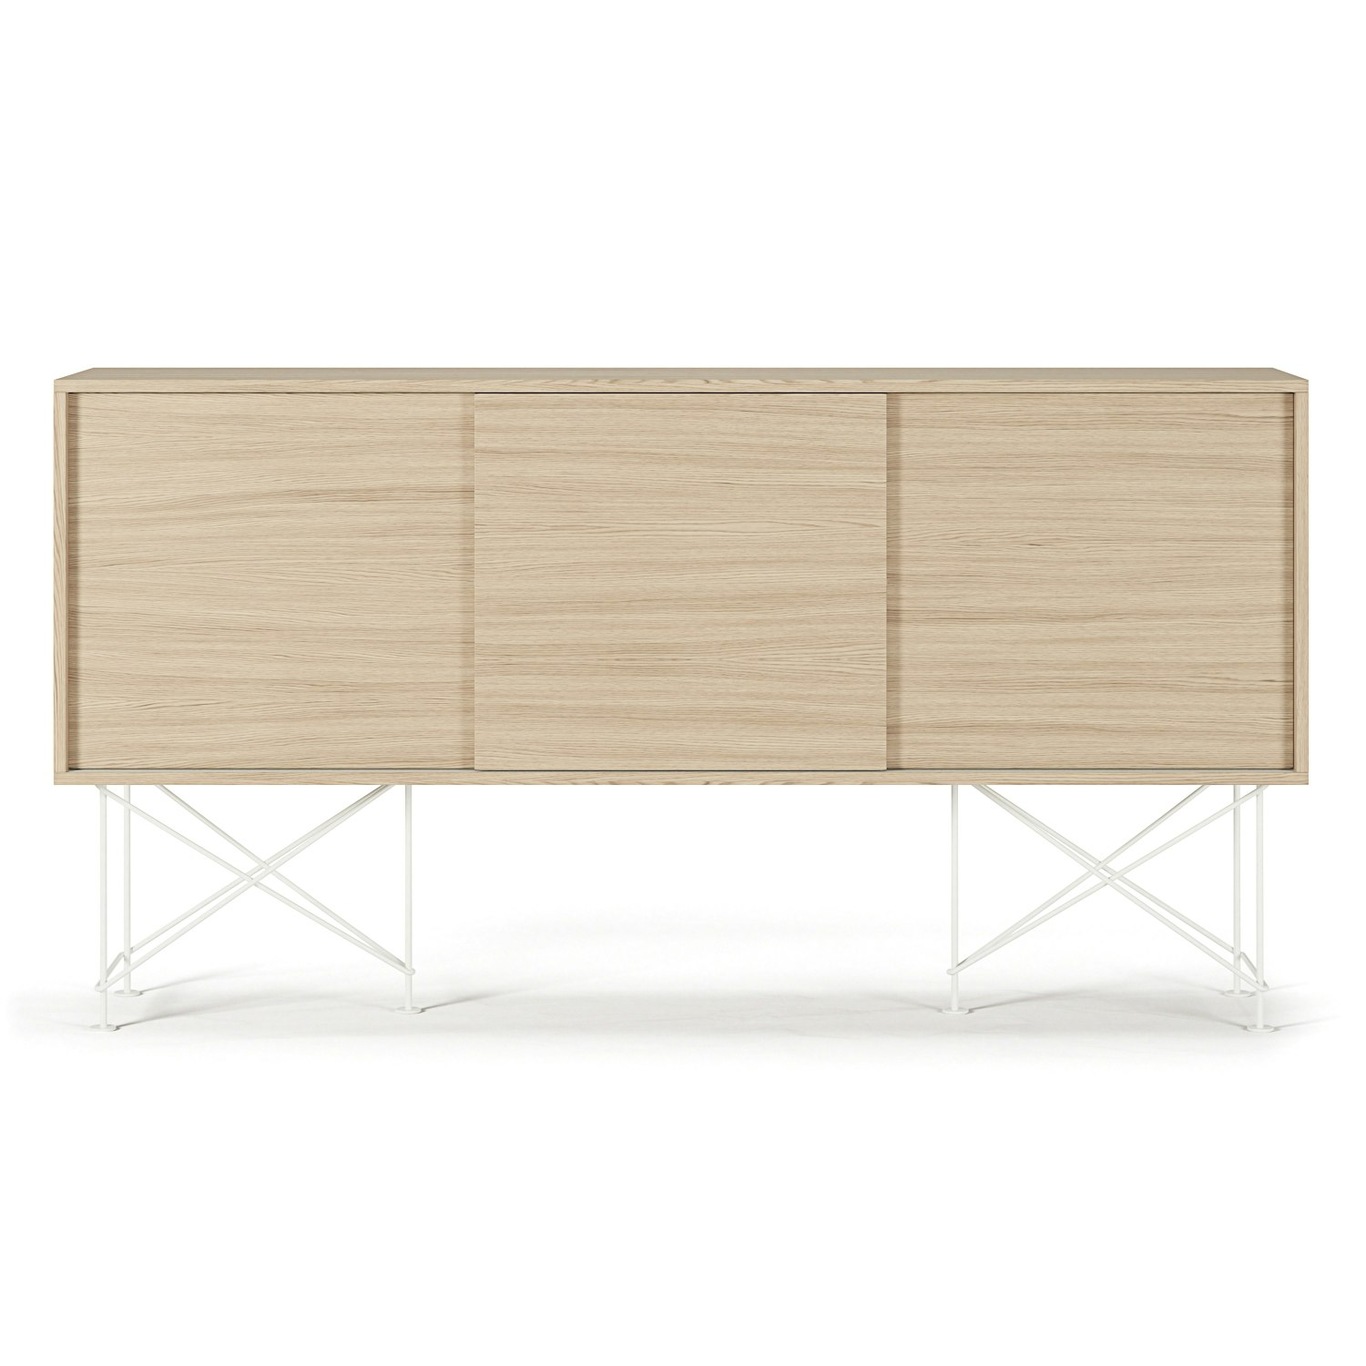 Vogue Sideboard With Stand 180 cm, White Oak / White